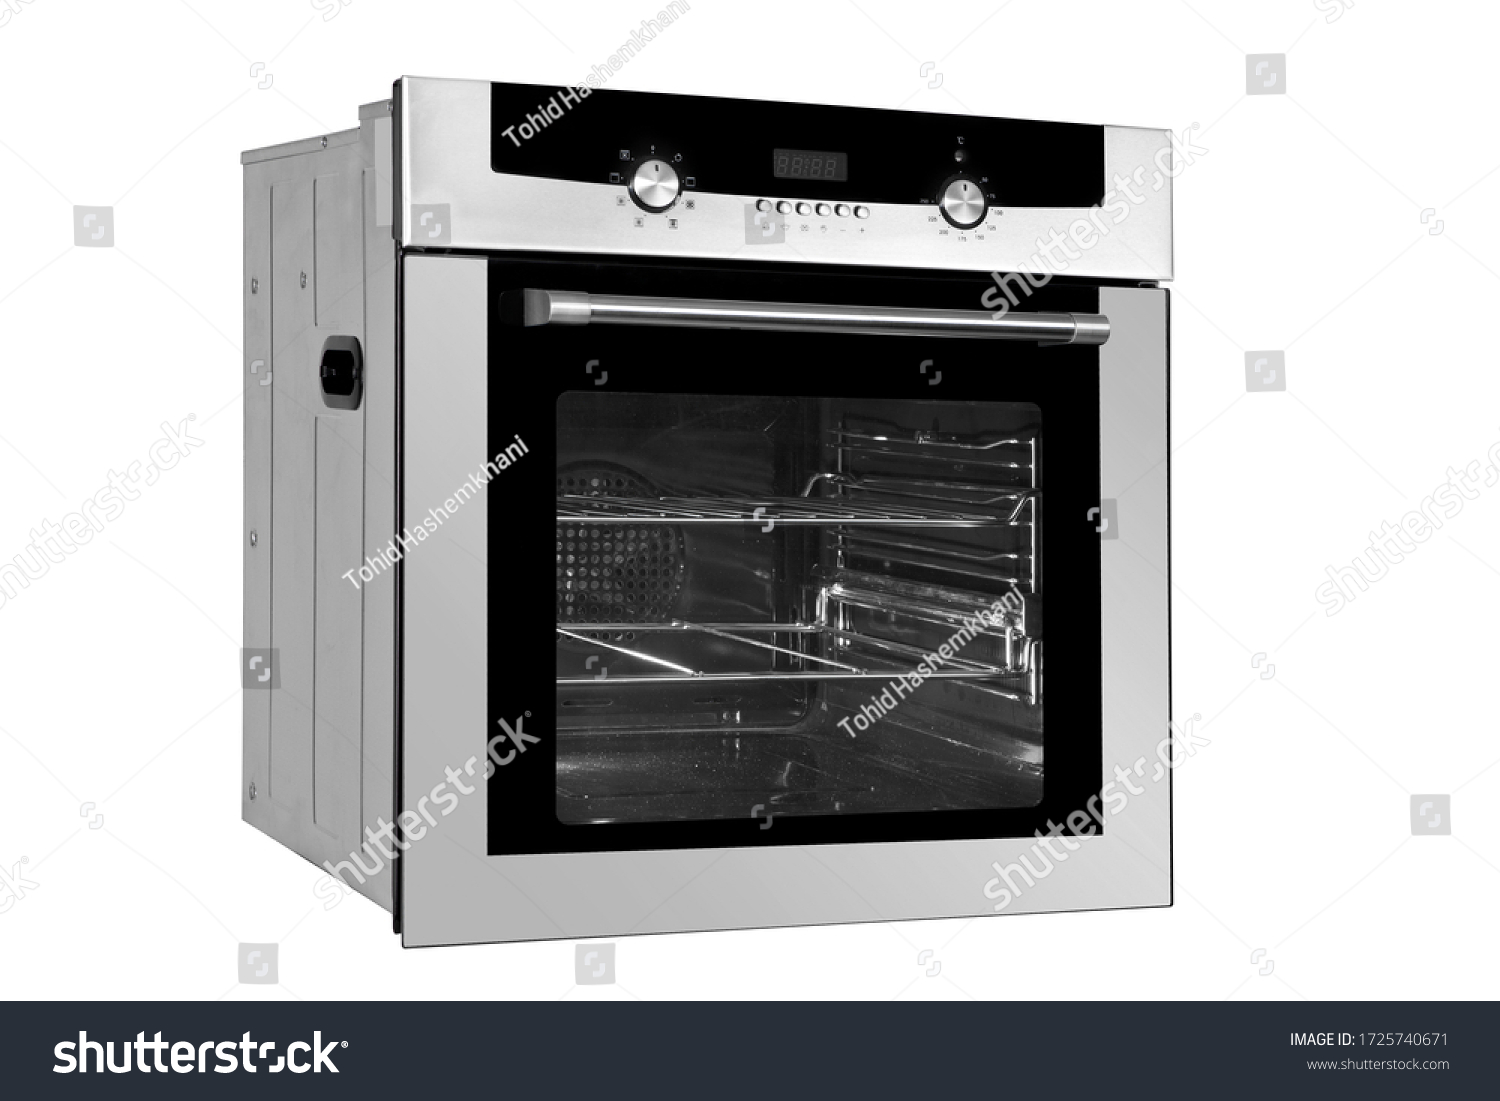 Kitchen oven isolated on white background #1725740671